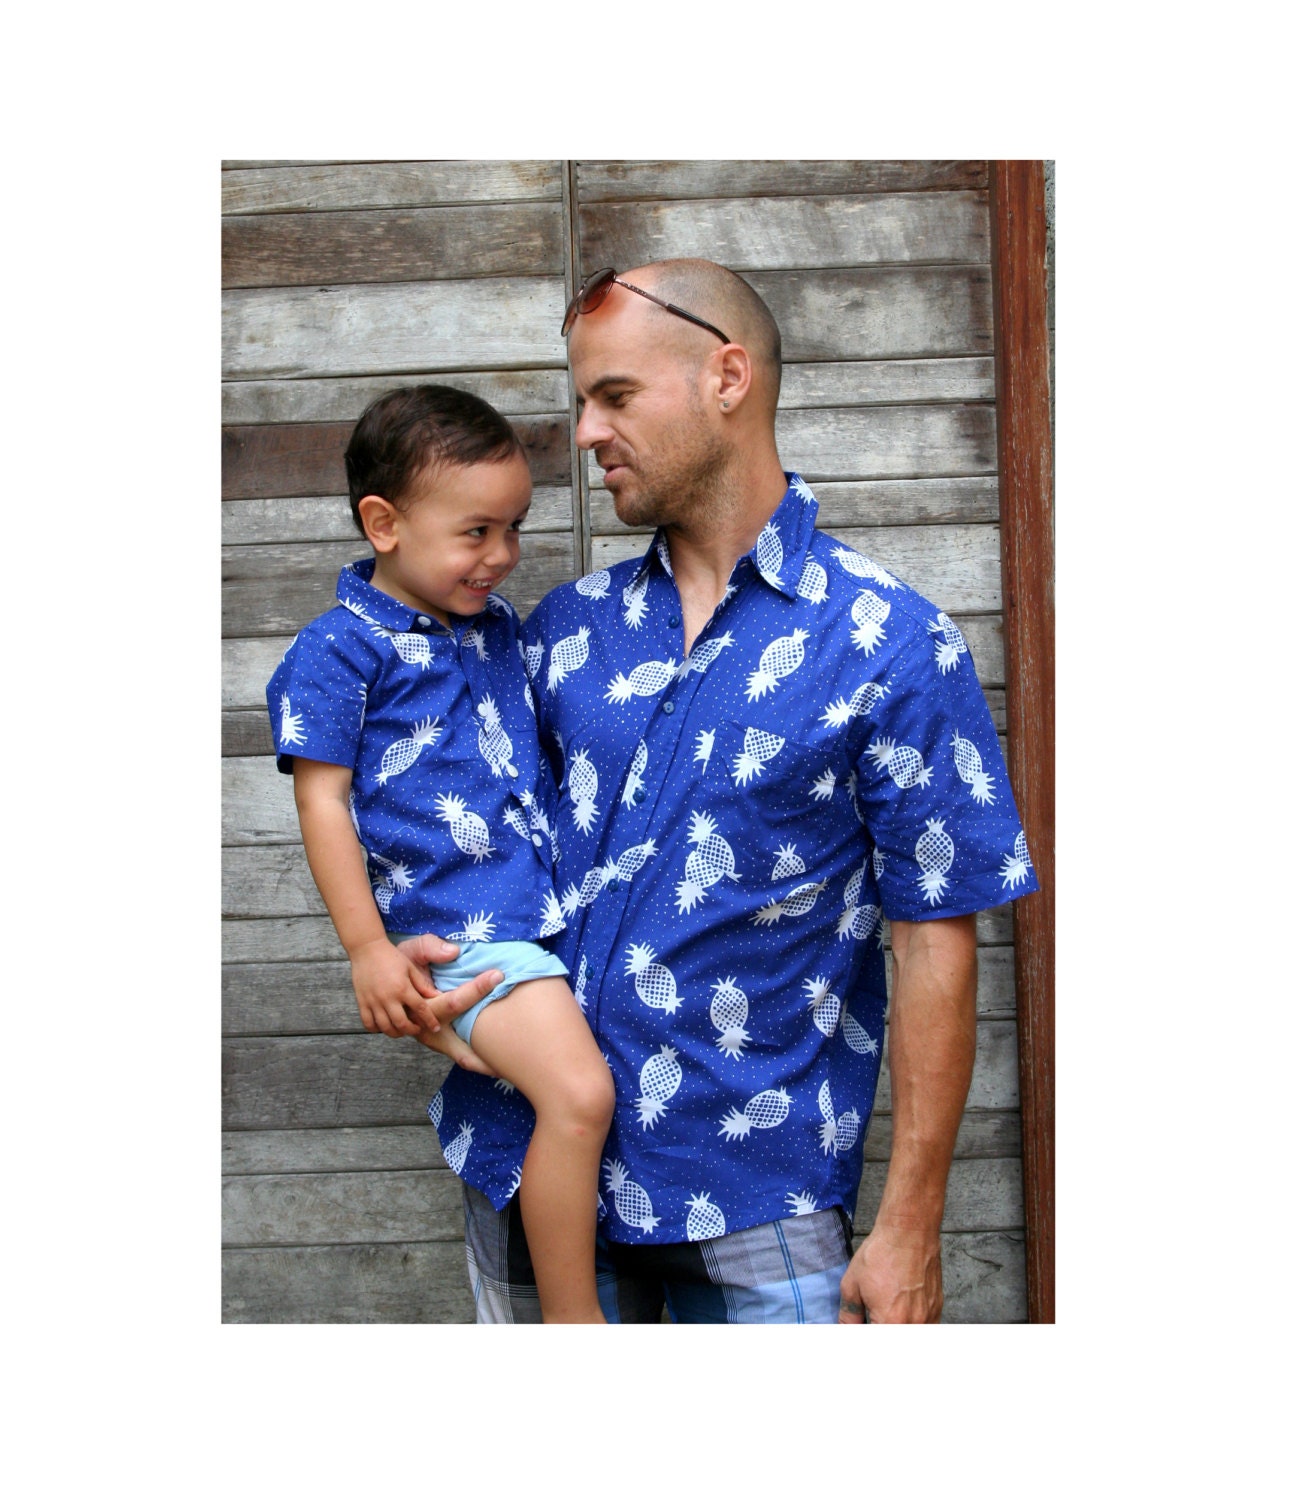 FATHER SON MATCHING LV BUTTON UP SHIRTS! By @exclusivegame